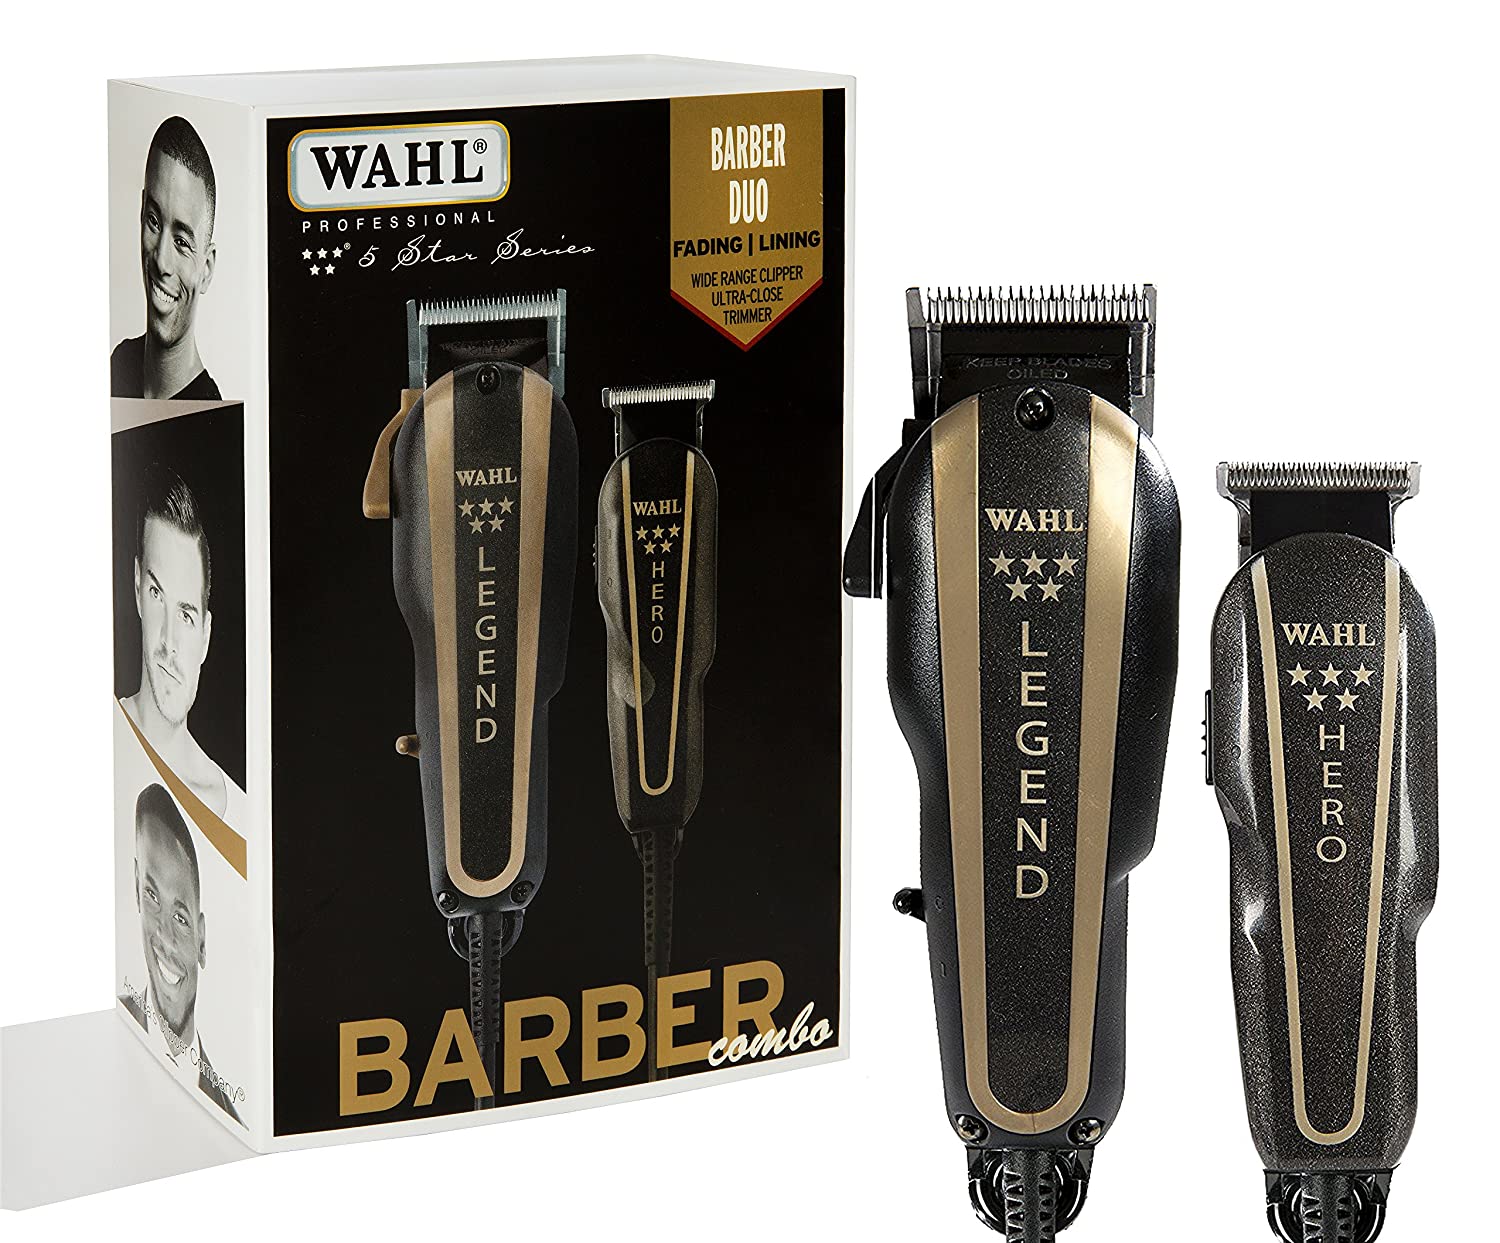 WAHL Professional 5-Star Barber Combo 8180